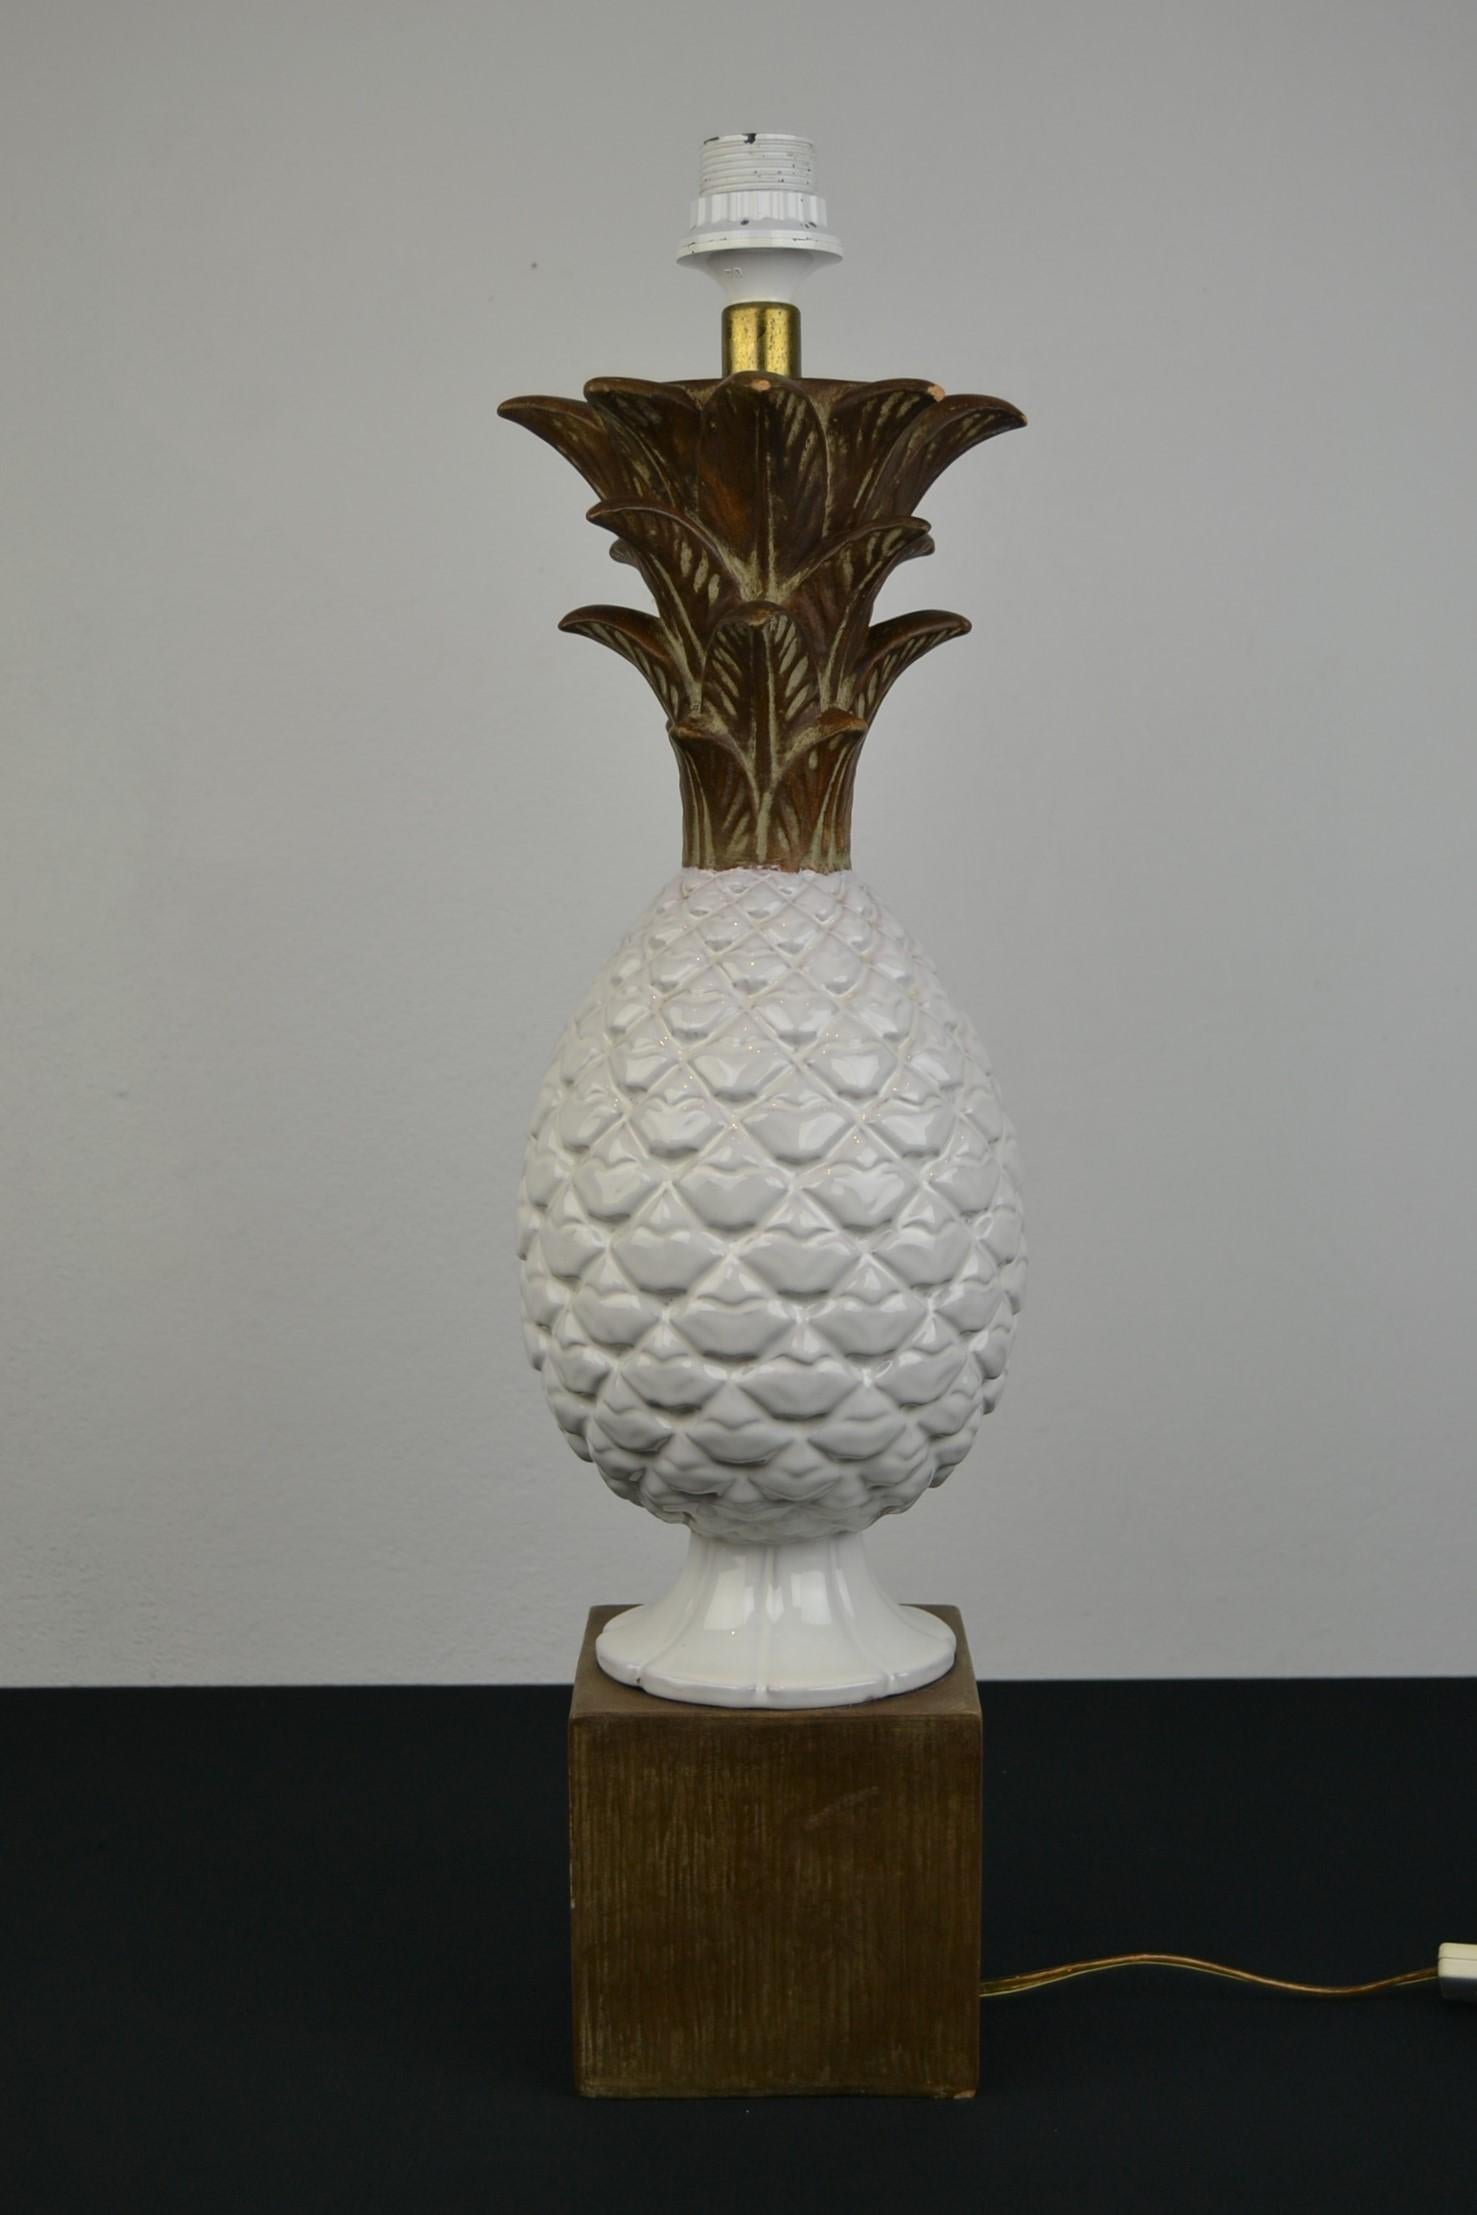 Zaccagnini Ceramic Pineapple Table Lamp, Italy, 1960s For Sale 10